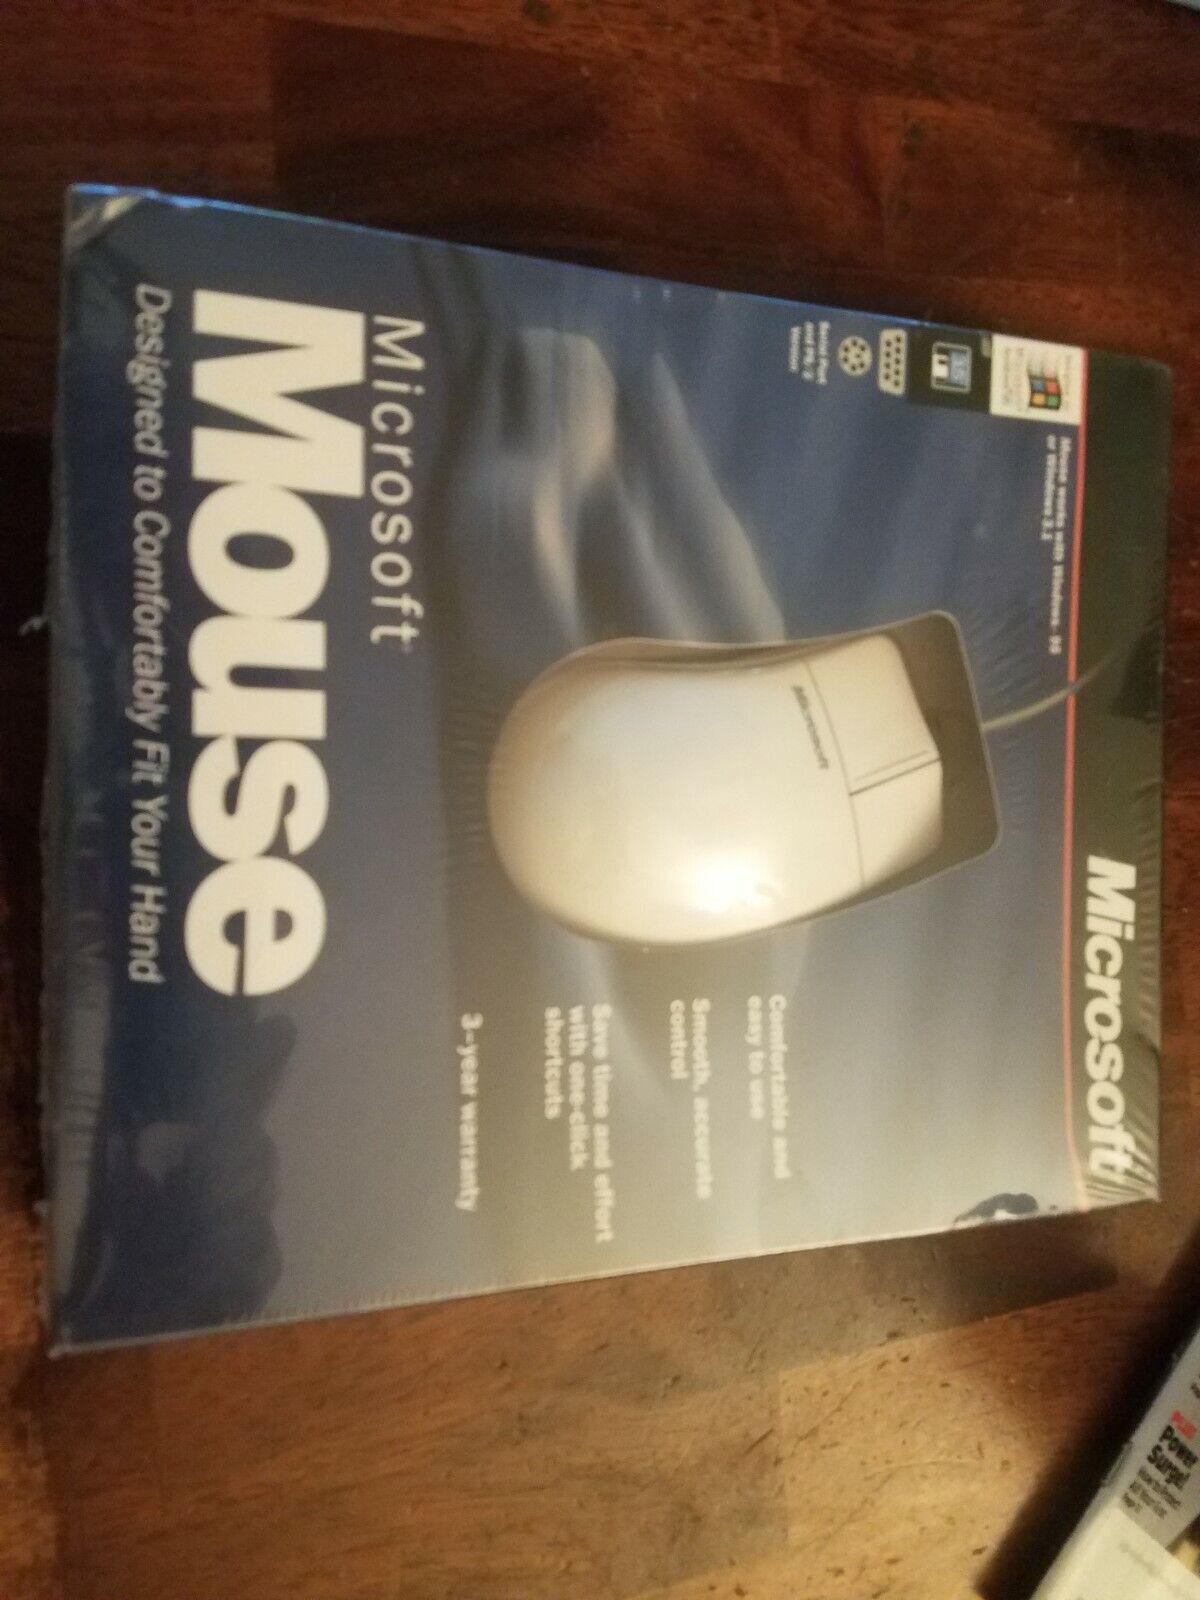 Vintage 1996 Microsoft Windows Mouse Factory Sealed 0996 94424 Serial Port